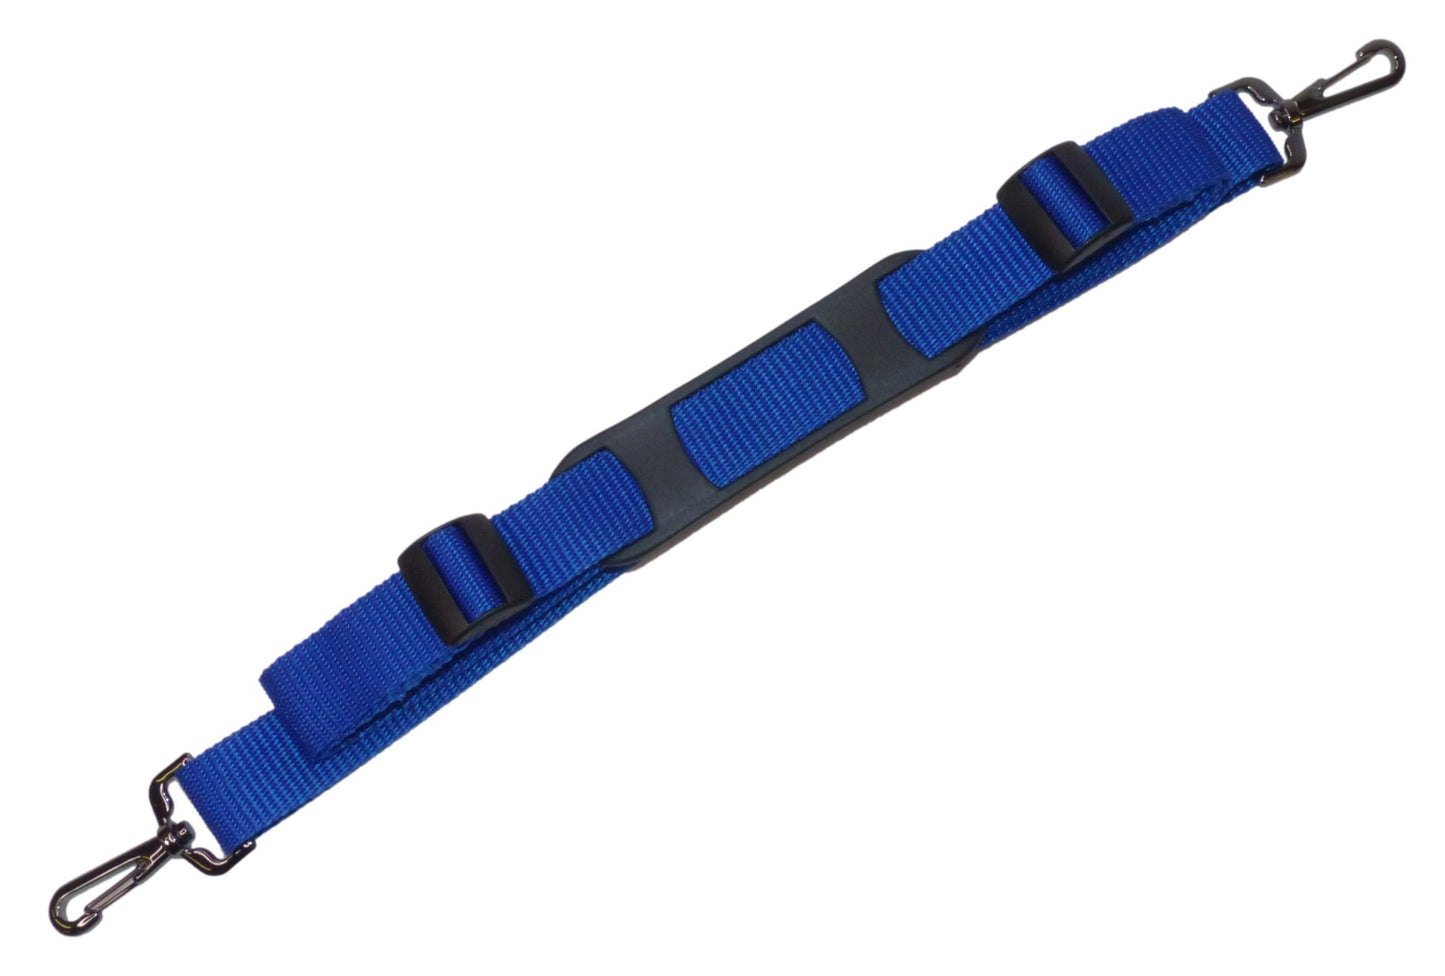 Benristraps 25mm Bag Strap with Metal Buckles and Shoulder Pad, 150cm in blue